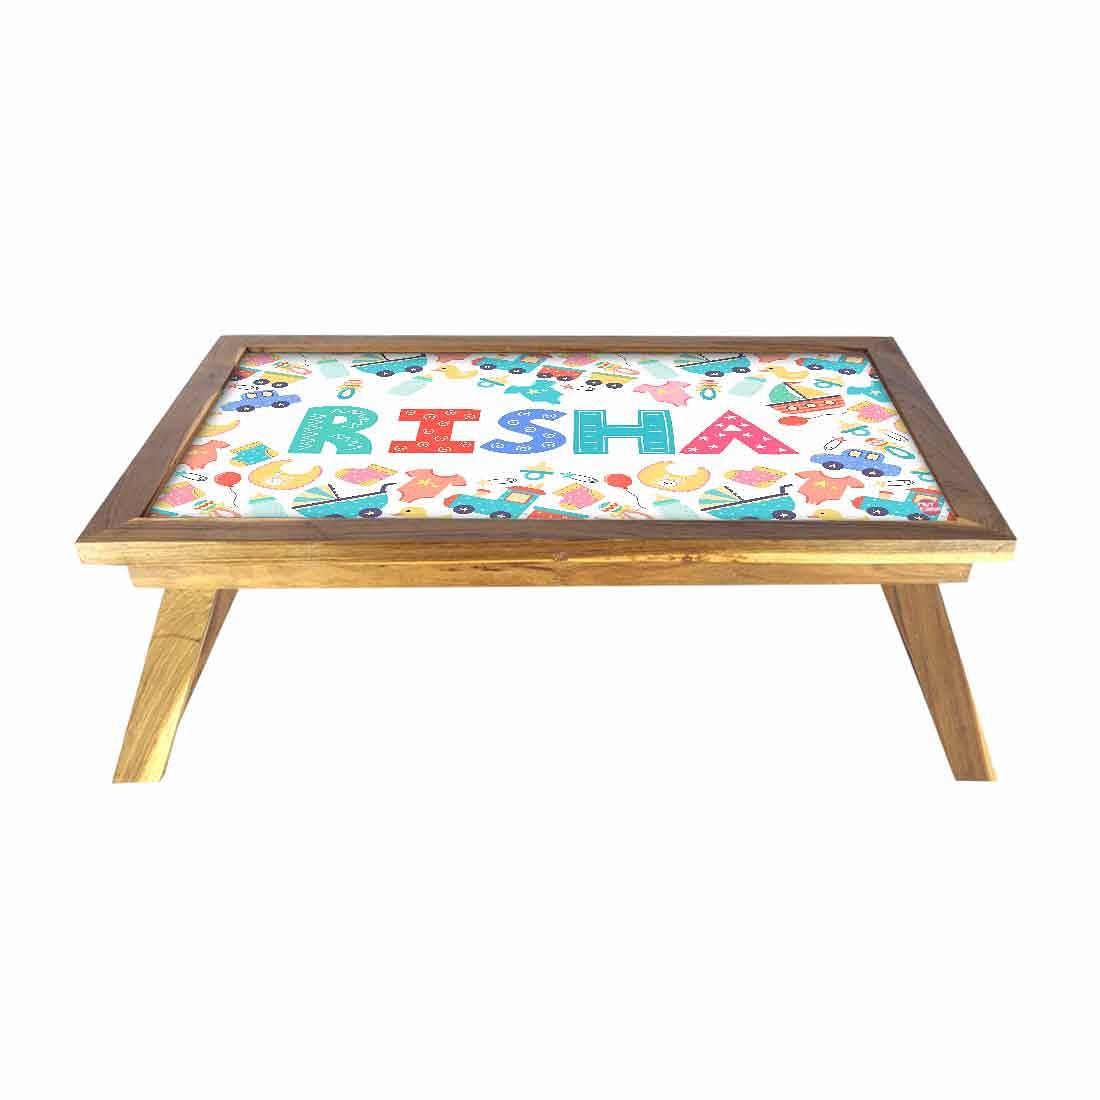 Customized Bed Breakfast Table - Cute Baby Toys Nutcase